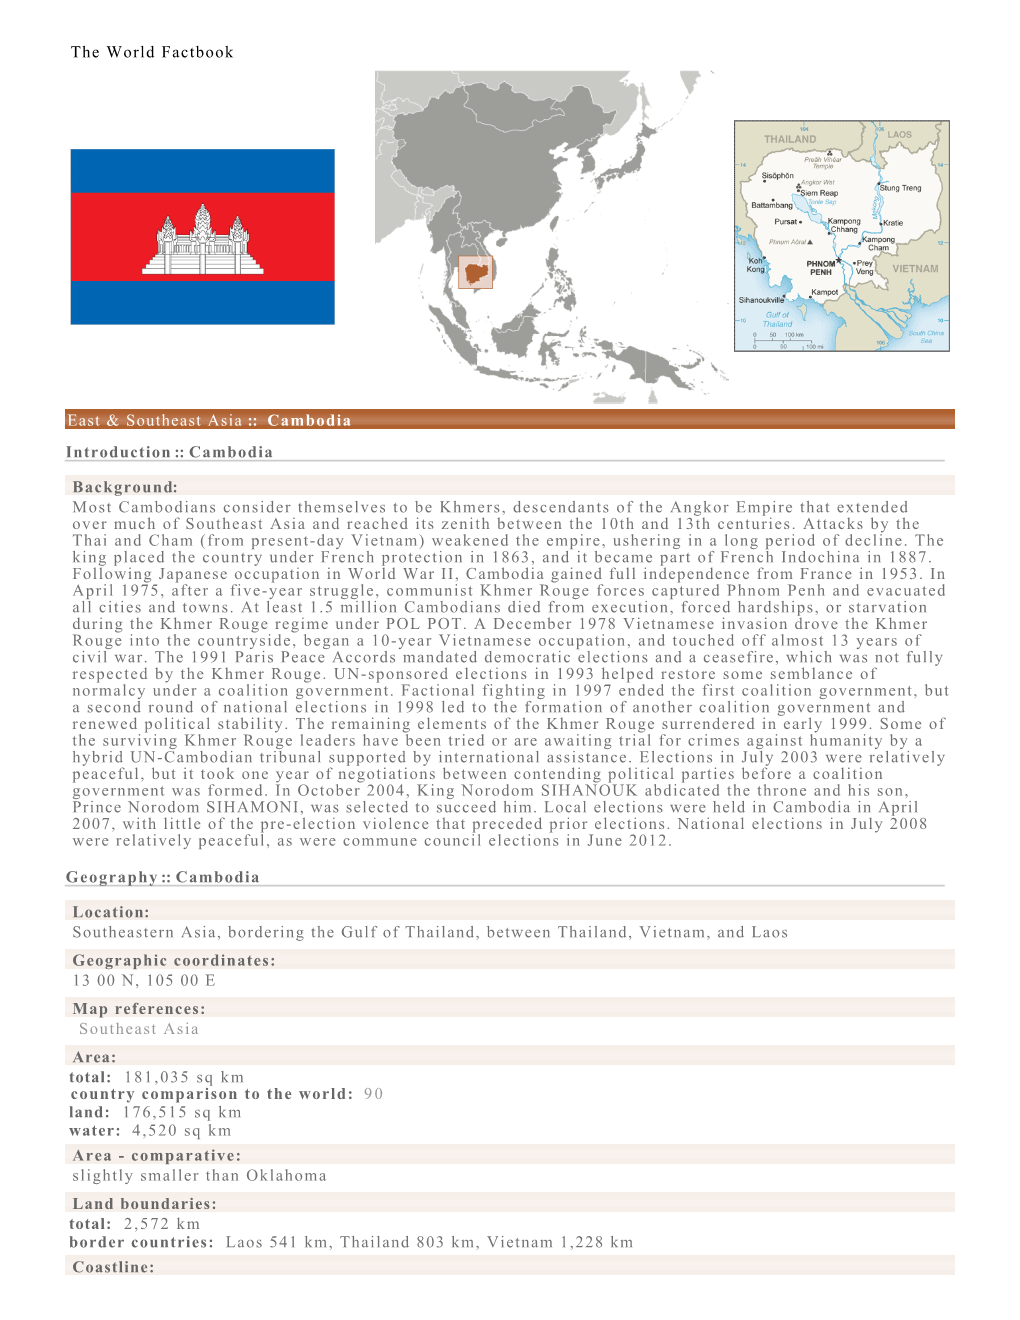 The World Factbook East & Southeast Asia :: Cambodia Introduction